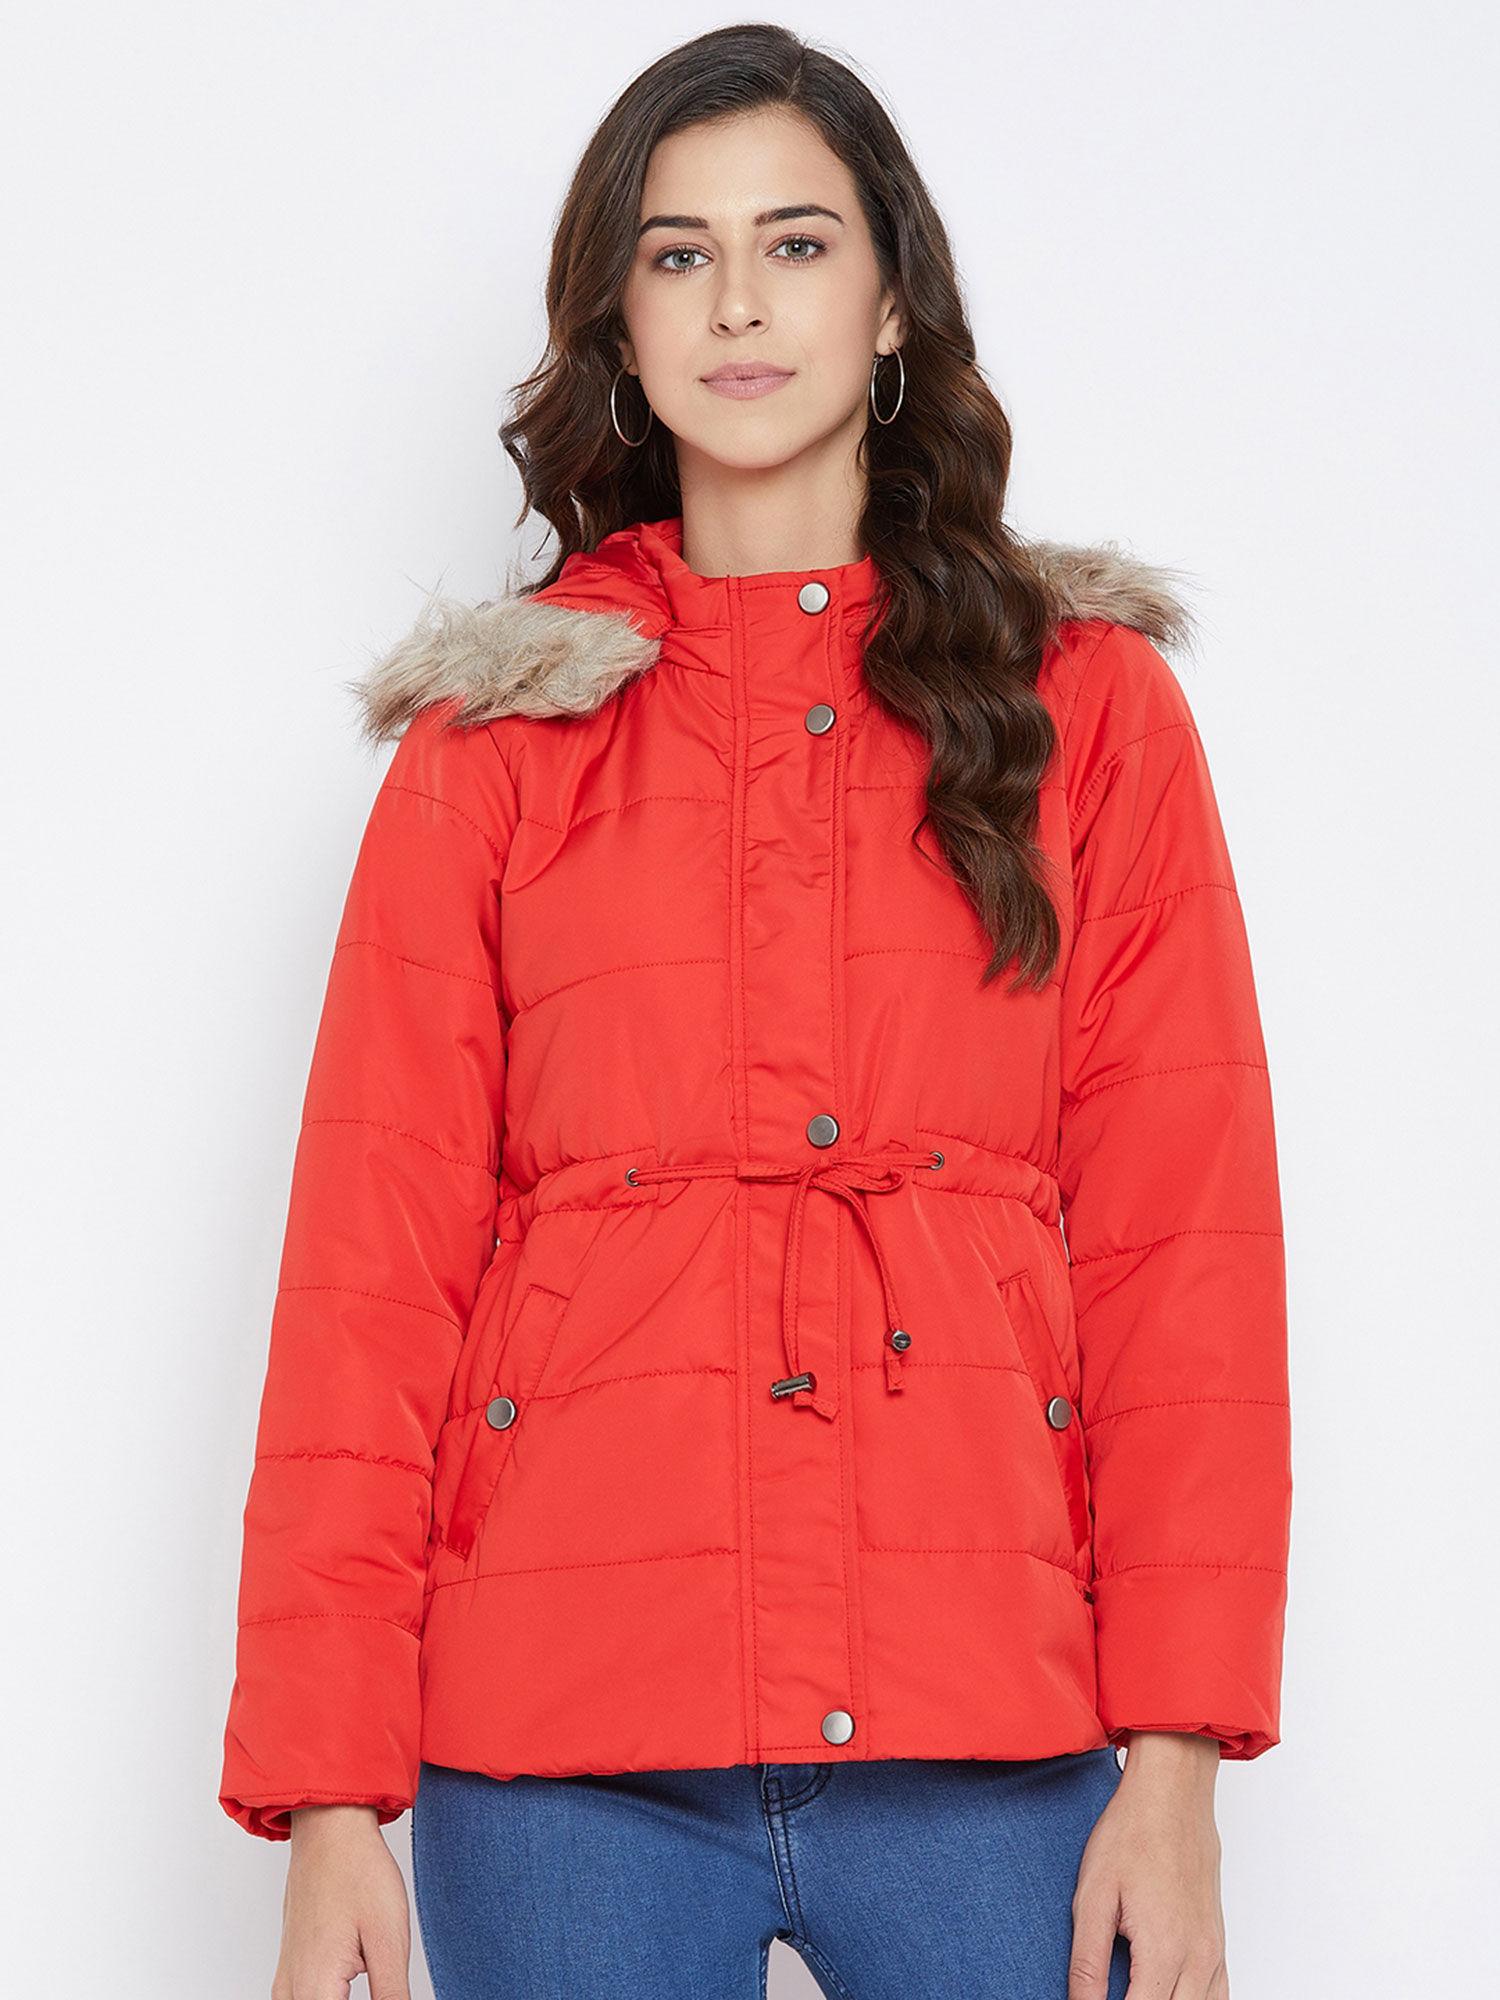 women-solid-red-jacket